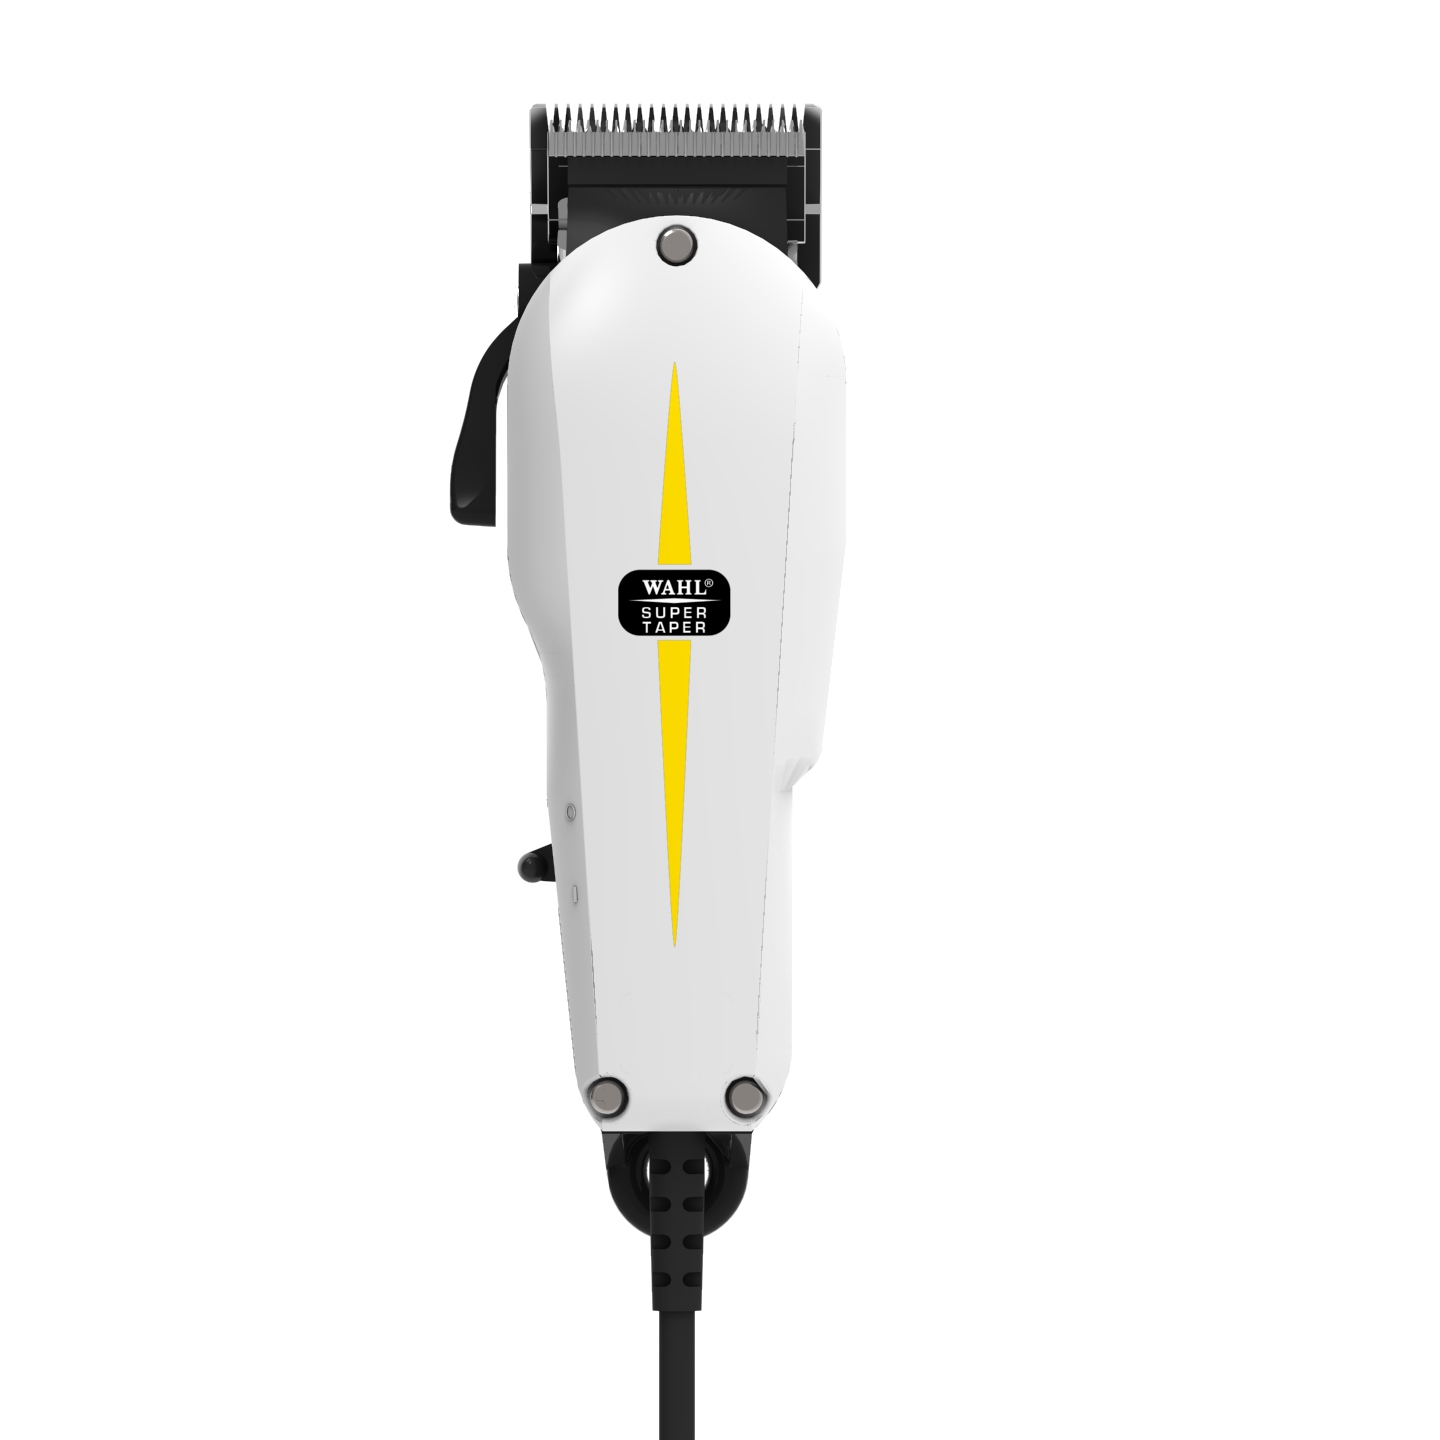 wahl hair clippers uk